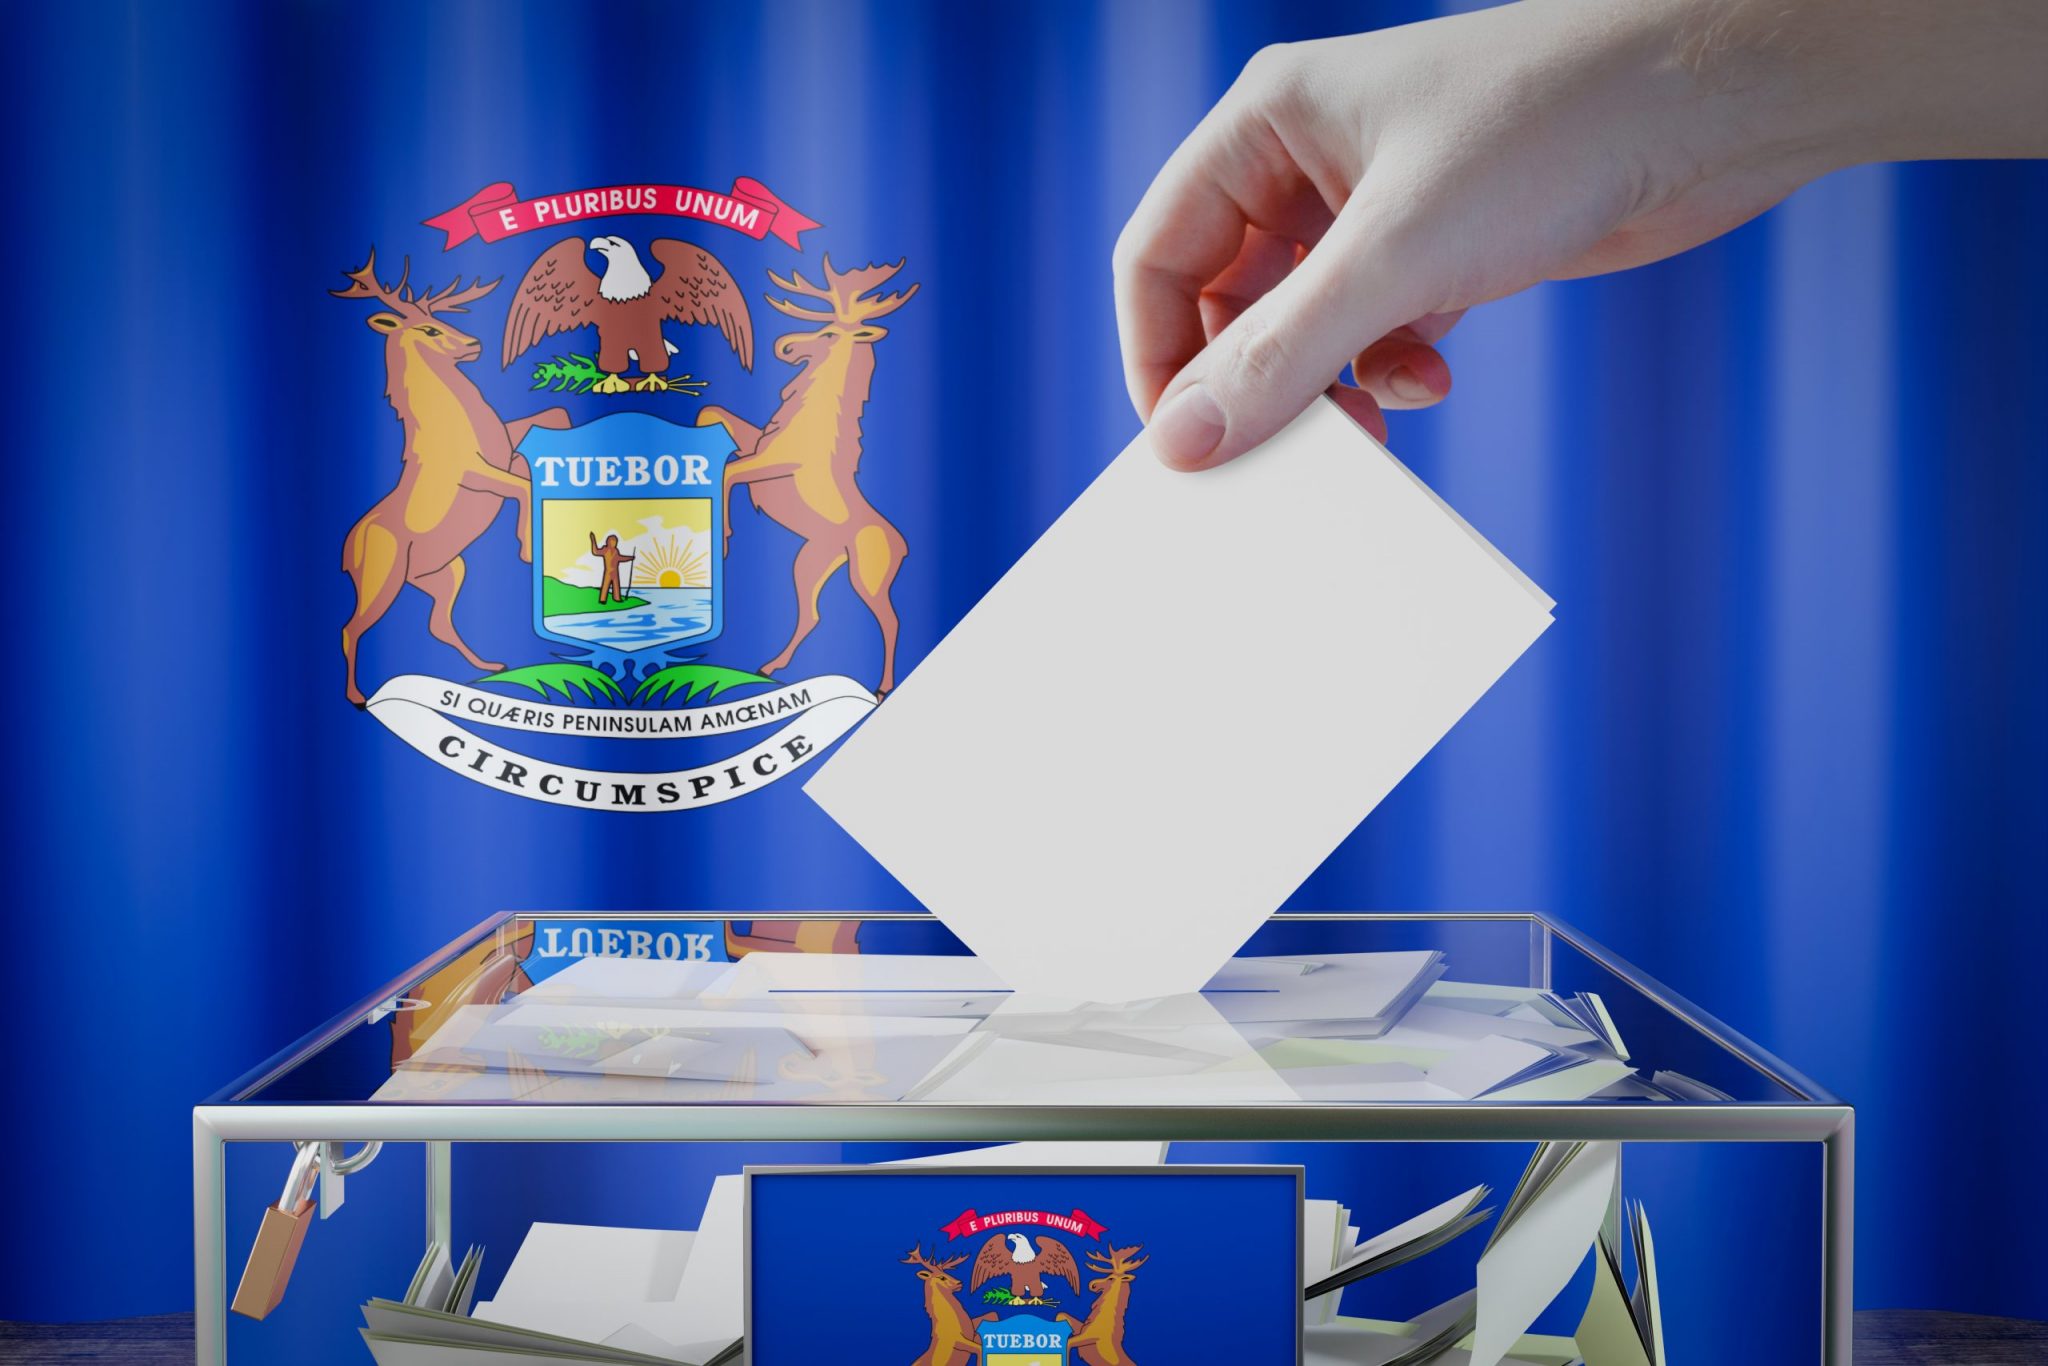 Michigan flag, hand dropping ballot card into a box - voting, election concept - 3D illustration